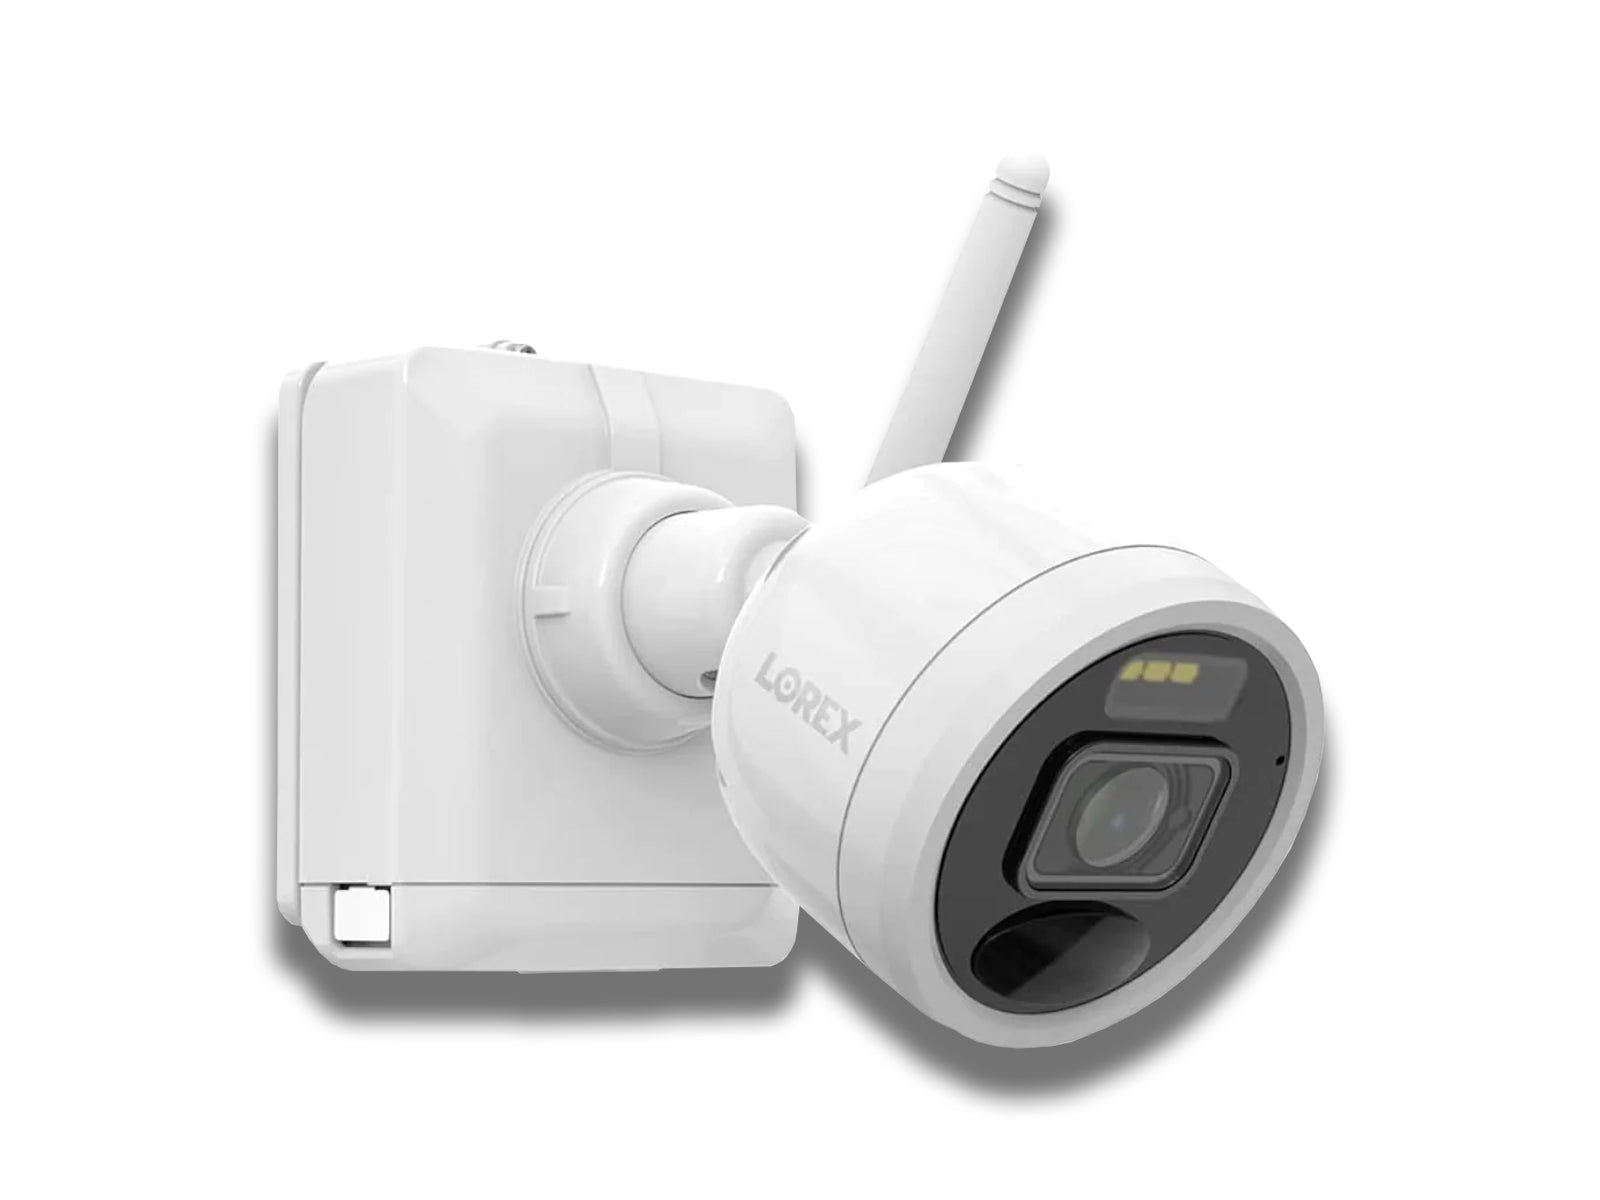 Image shows a left side veiw of the lorex camera on a white background